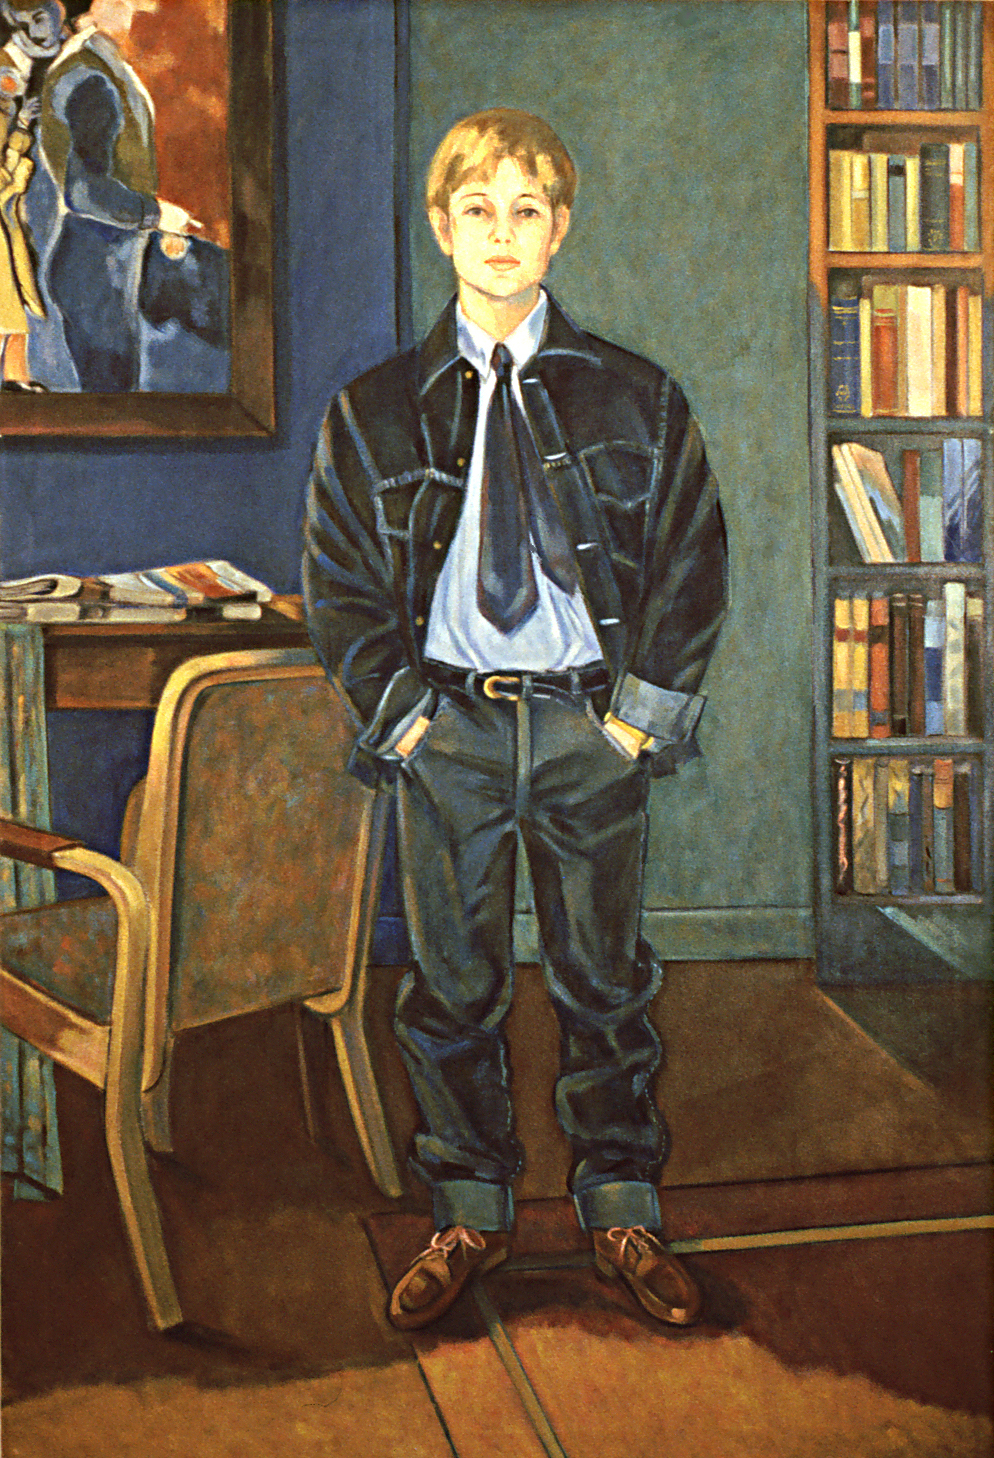 Large Figure Painting of Max Kitaj by Ethel Fisher, 1994, oil on canvas, 56 x 38 inches, twentieth century figure painting.